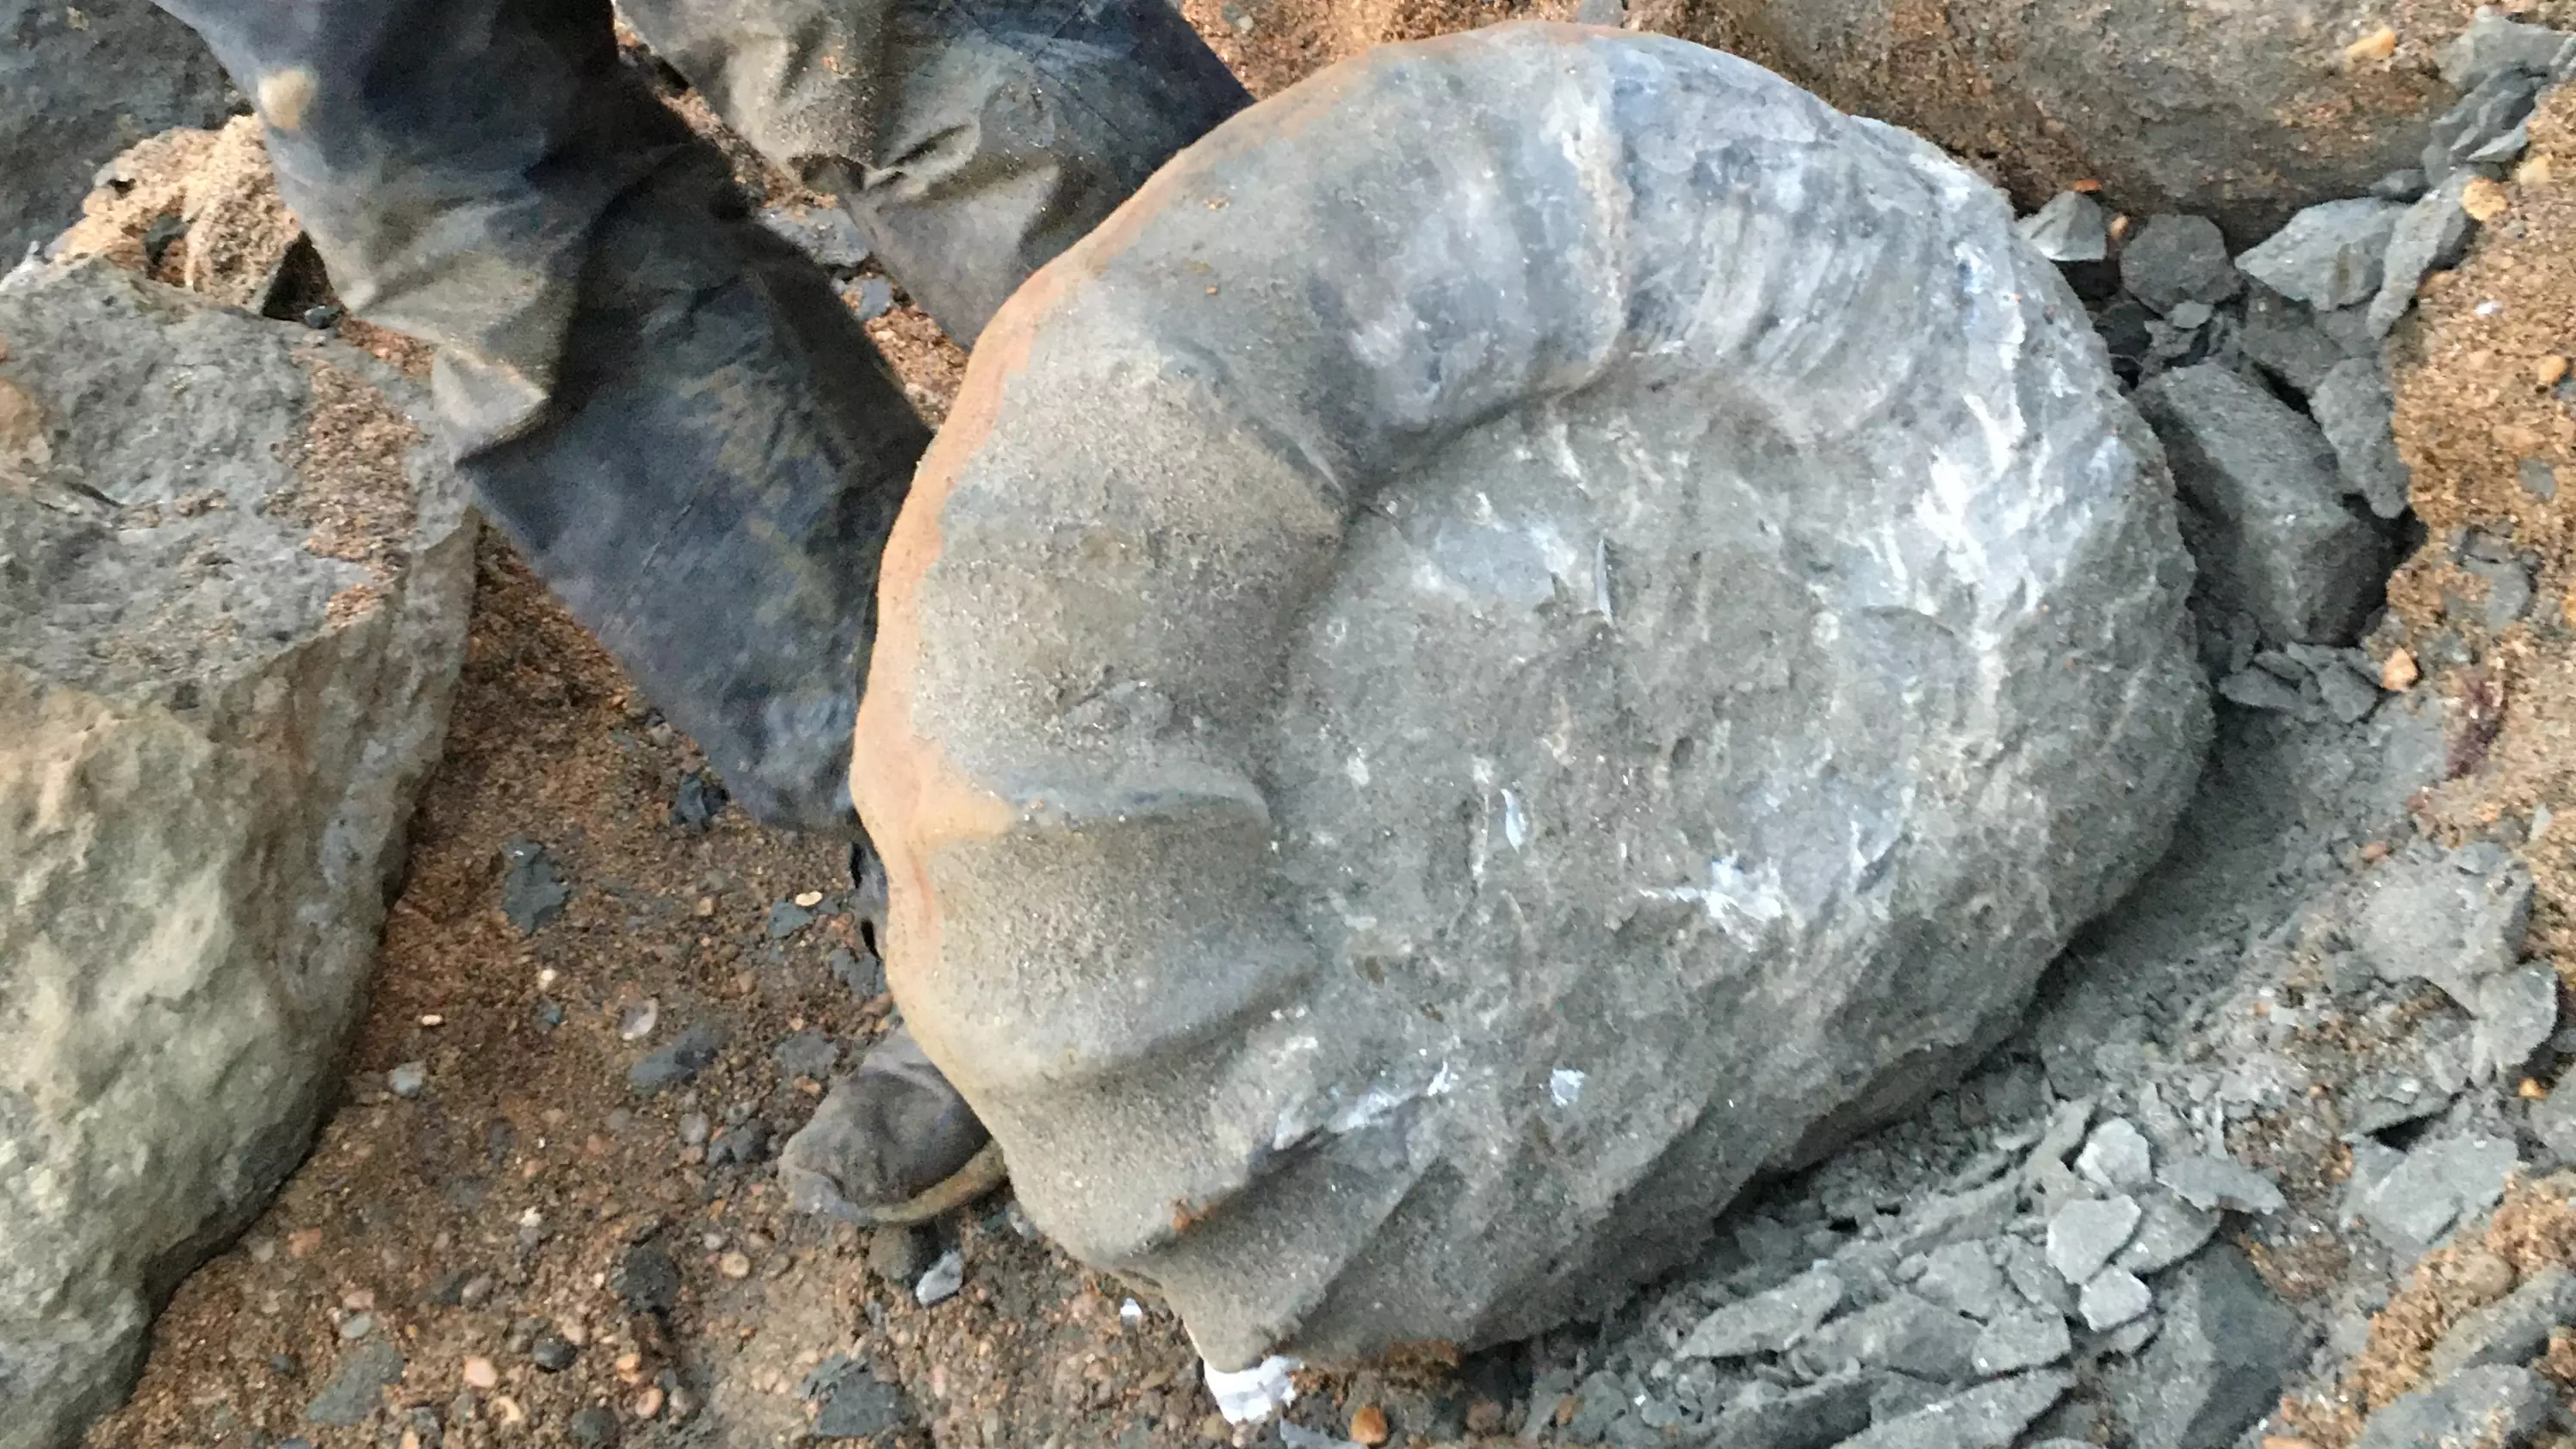 University Students Discover Huge 212lb Ammonite Fossil In Isle Of Wight